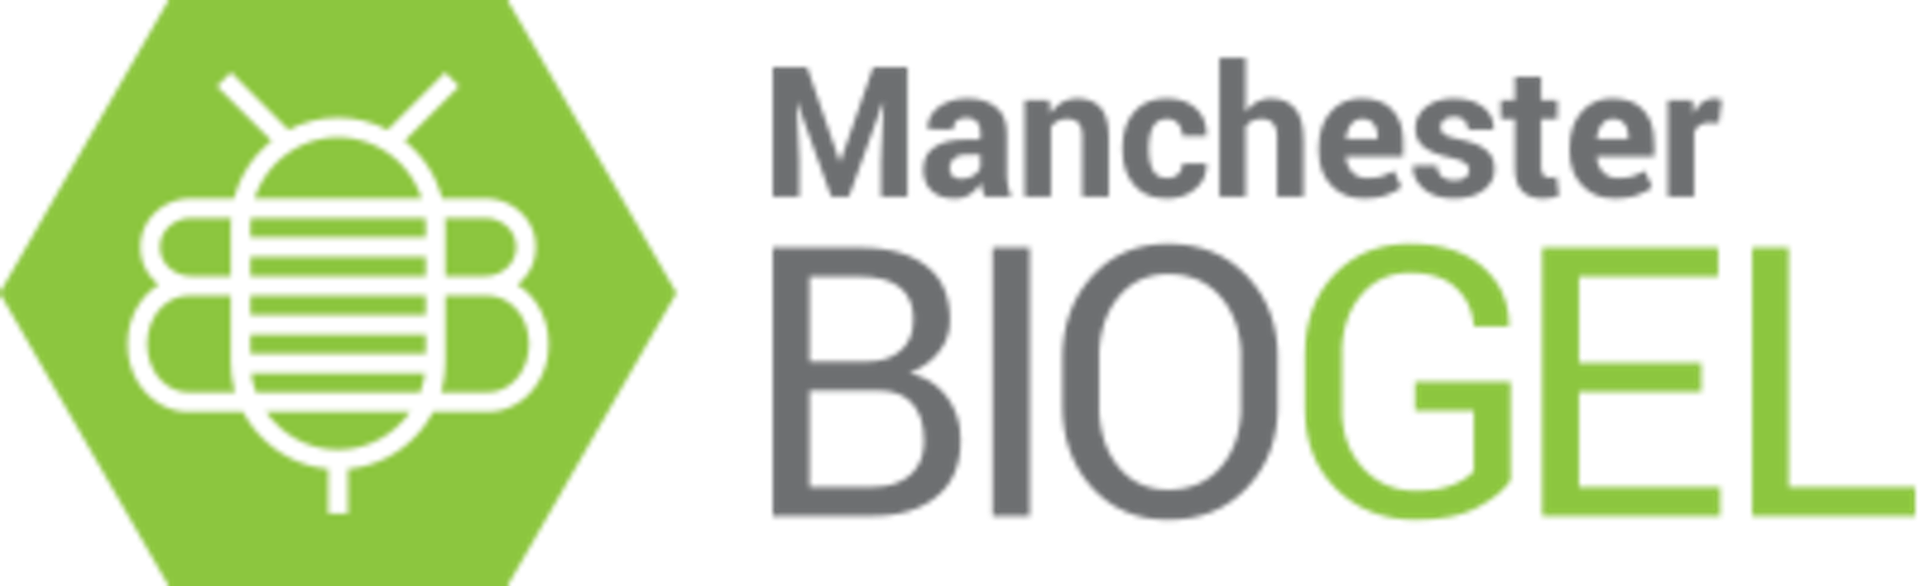 Offers Invited for Intellectual Property of Manchester Biogel